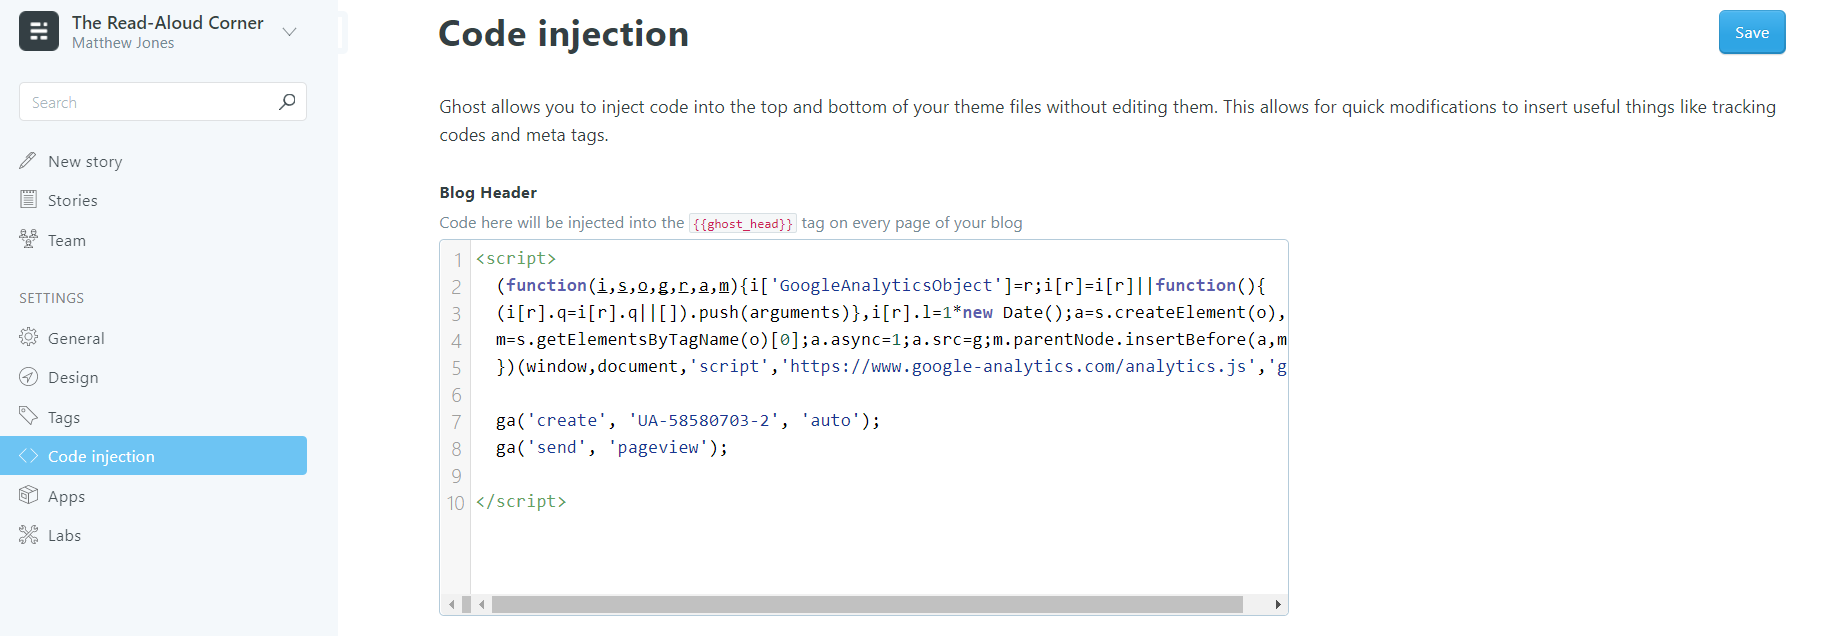 A screenshot of the Read-Aloud Corner's Code Injection tab, showing the Google Analytics script being injected into the header on every page of that site.